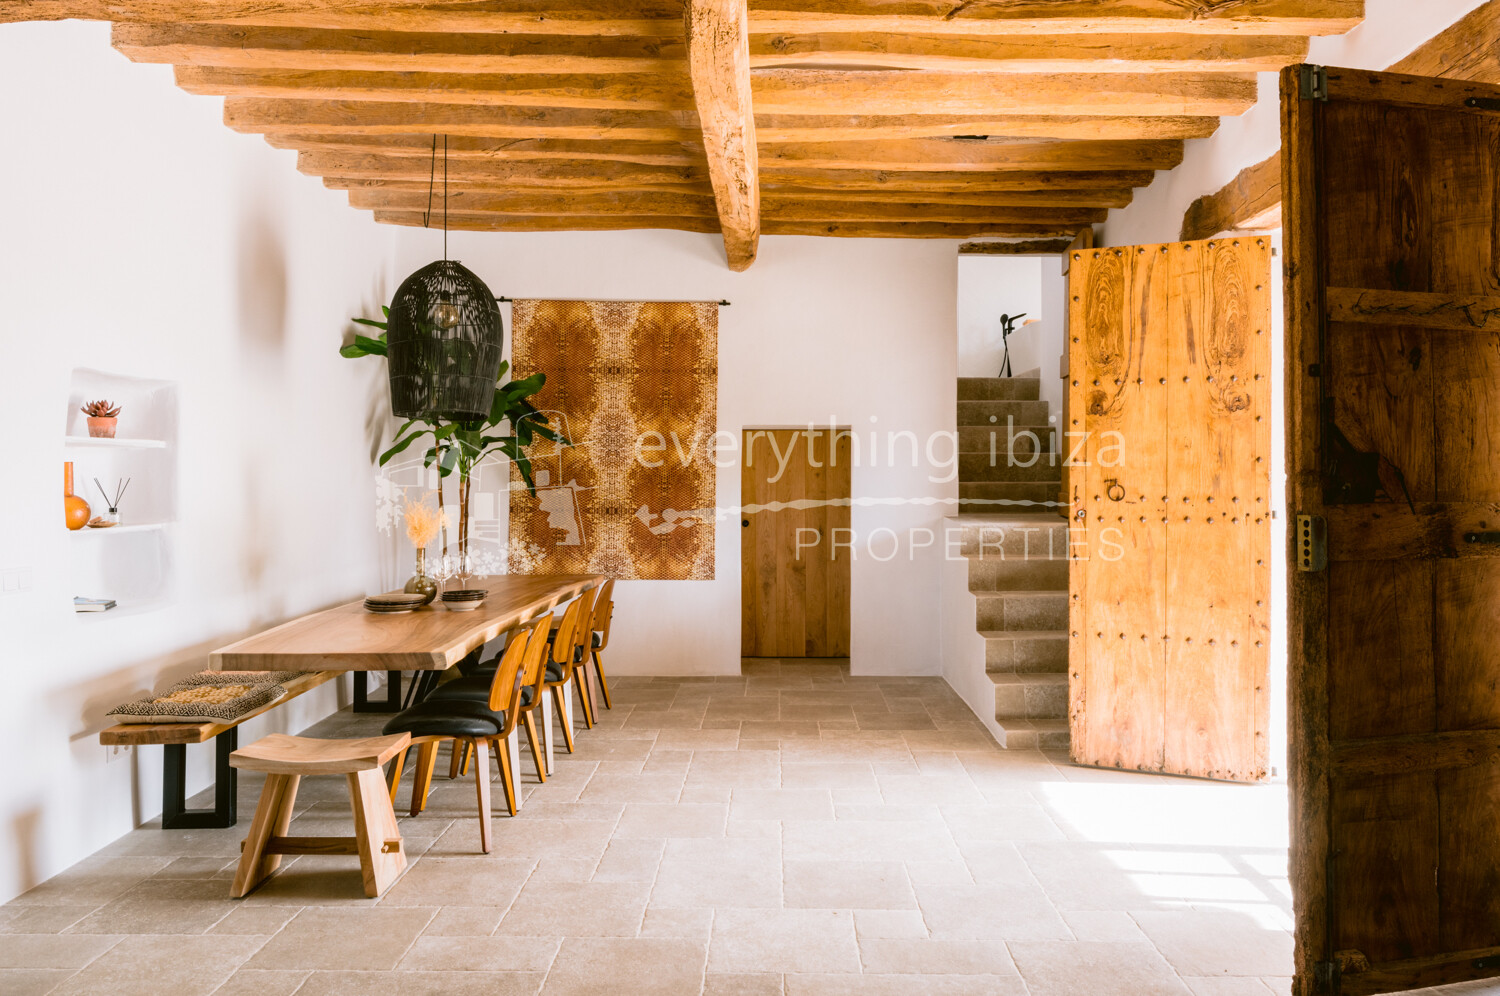 Beautifully Restored Rural Finca in San Jordi, ref. 1642, for sale in Ibiza by everything ibiza Properties